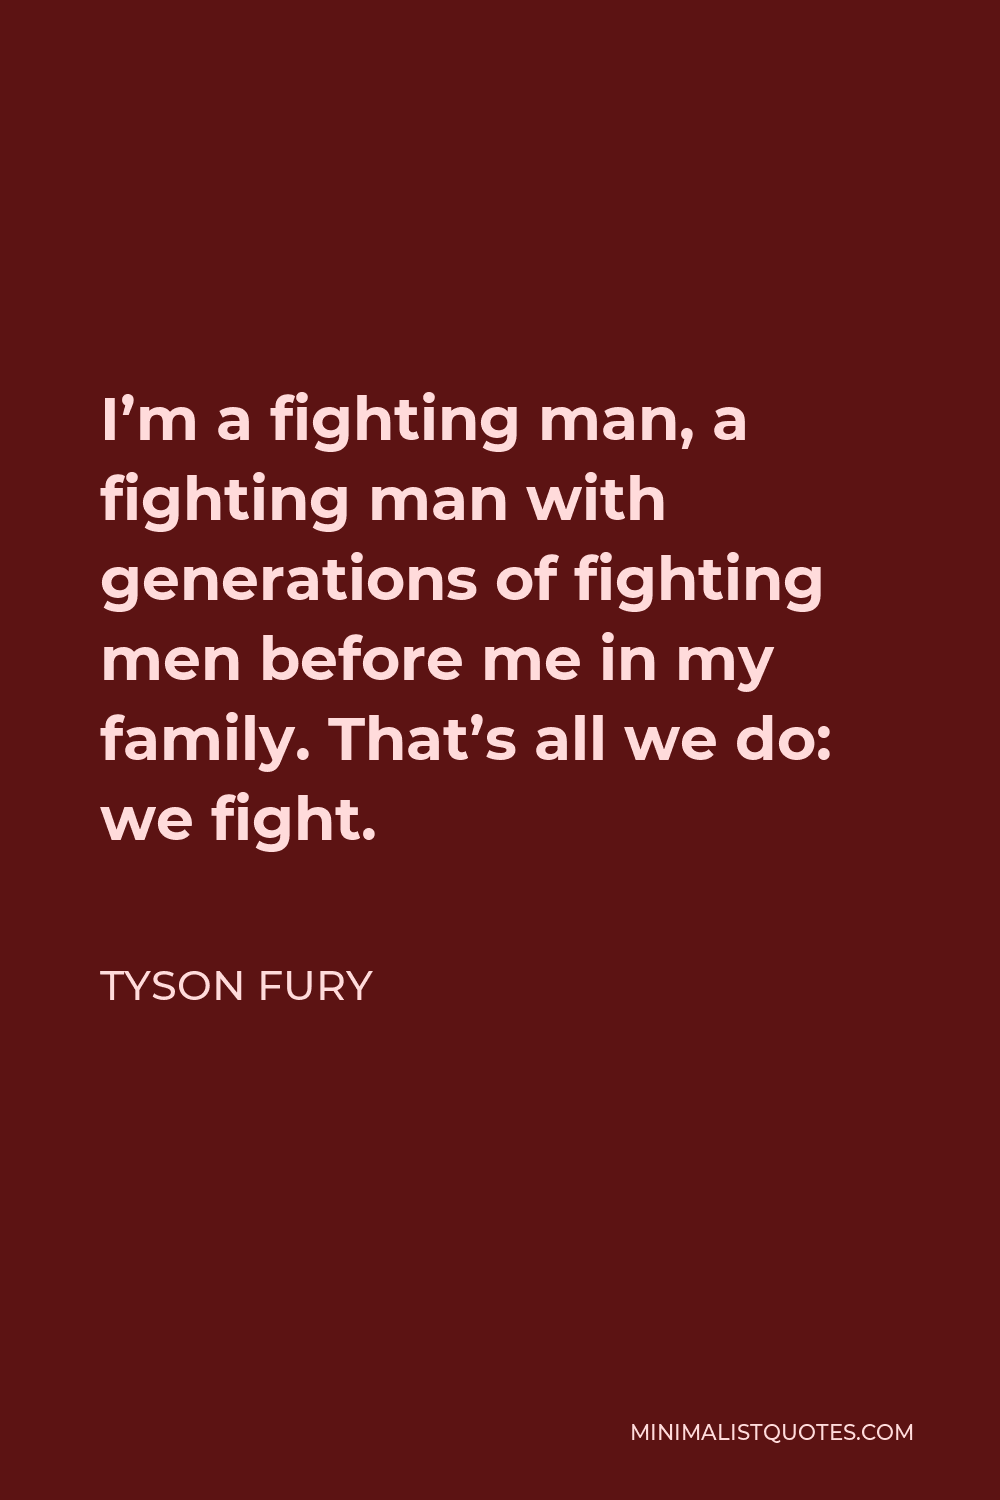 Tyson Fury Quote - I’m a fighting man, a fighting man with generations of fighting men before me in my family. That’s all we do: we fight.